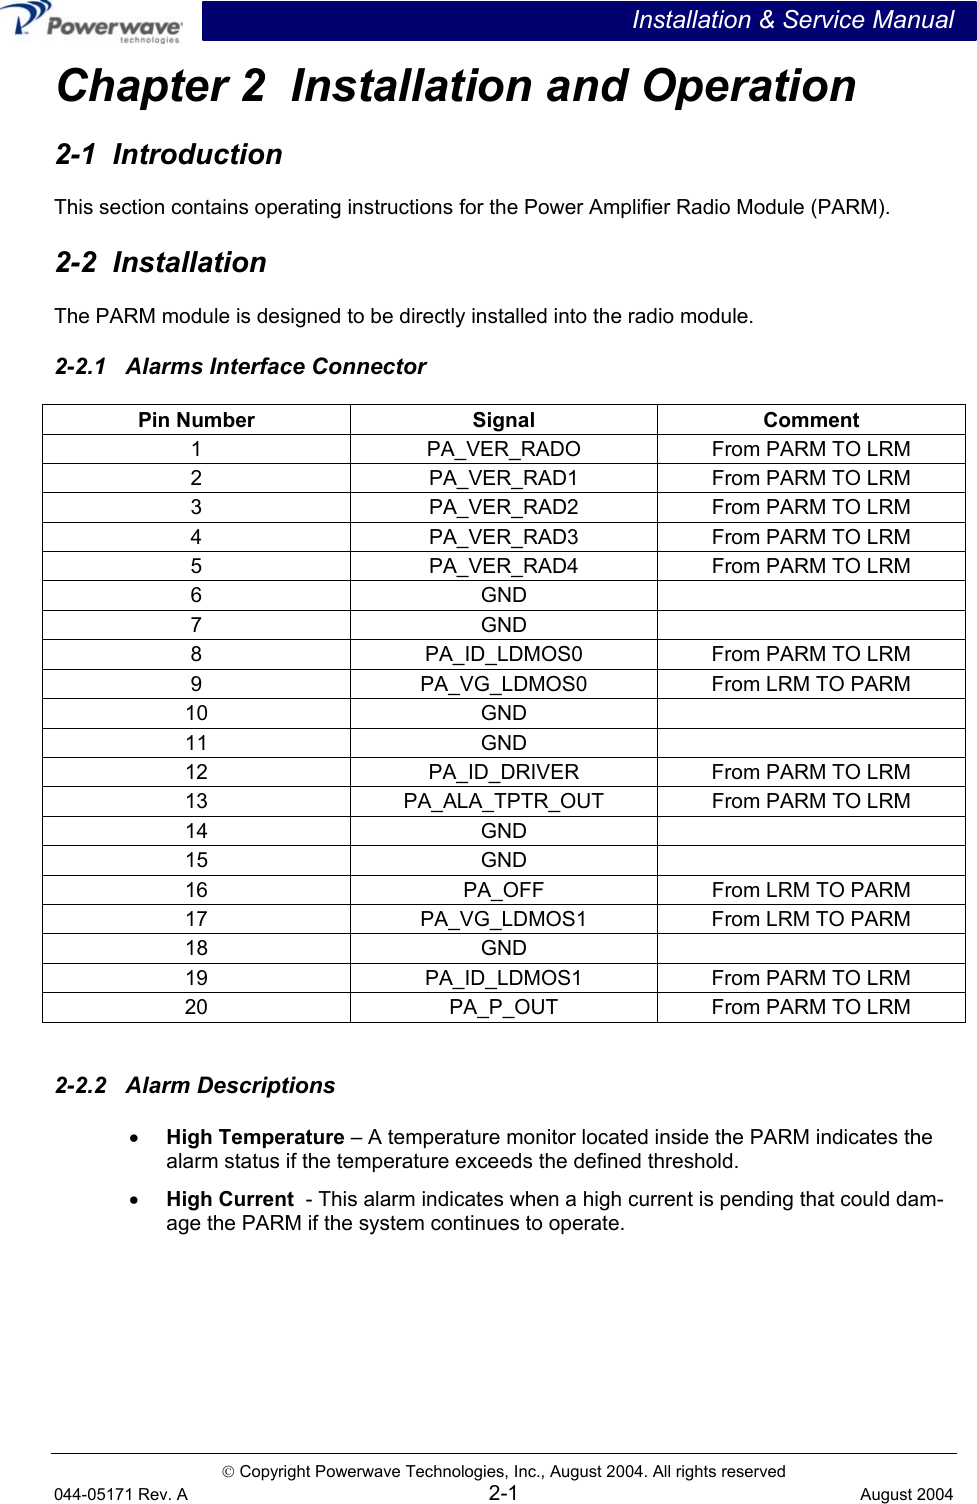  Installation &amp; Service Manual  Copyright Powerwave Technologies, Inc., August 2004. All rights reserved 044-05171 Rev. A 2-1  August 2004 Chapter 2  Installation and Operation 2-1  Introduction This section contains operating instructions for the Power Amplifier Radio Module (PARM).  2-2  Installation The PARM module is designed to be directly installed into the radio module. 2-2.1   Alarms Interface Connector Pin Number  Signal  Comment 1  PA_VER_RADO  From PARM TO LRM 2 PA_VER_RAD1 From PARM TO LRM 3 PA_VER_RAD2 From PARM TO LRM 4 PA_VER_RAD3 From PARM TO LRM 5 PA_VER_RAD4 From PARM TO LRM 6 GND   7 GND   8  PA_ID_LDMOS0  From PARM TO LRM 9  PA_VG_LDMOS0  From LRM TO PARM 10 GND   11 GND   12  PA_ID_DRIVER  From PARM TO LRM 13  PA_ALA_TPTR_OUT  From PARM TO LRM 14 GND   15 GND   16  PA_OFF  From LRM TO PARM 17 PA_VG_LDMOS1 From LRM TO PARM 18 GND  19  PA_ID_LDMOS1  From PARM TO LRM 20  PA_P_OUT  From PARM TO LRM  2-2.2   Alarm Descriptions •  High Temperature – A temperature monitor located inside the PARM indicates the alarm status if the temperature exceeds the defined threshold.  •  High Current  - This alarm indicates when a high current is pending that could dam-age the PARM if the system continues to operate.    